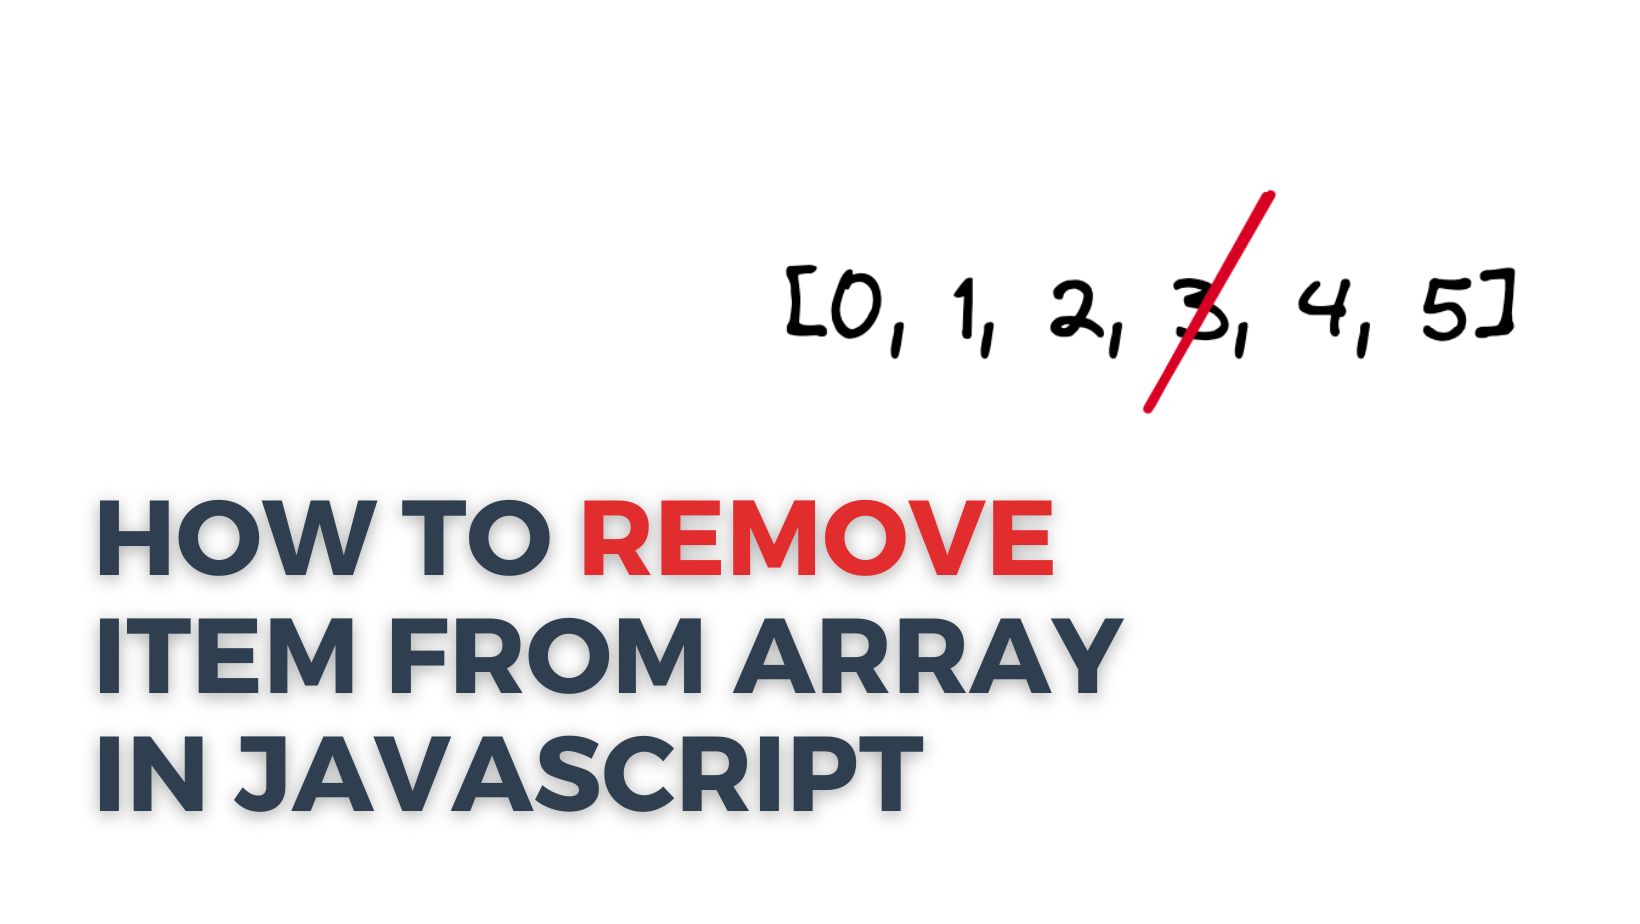 How to remove item from array in JavaScript